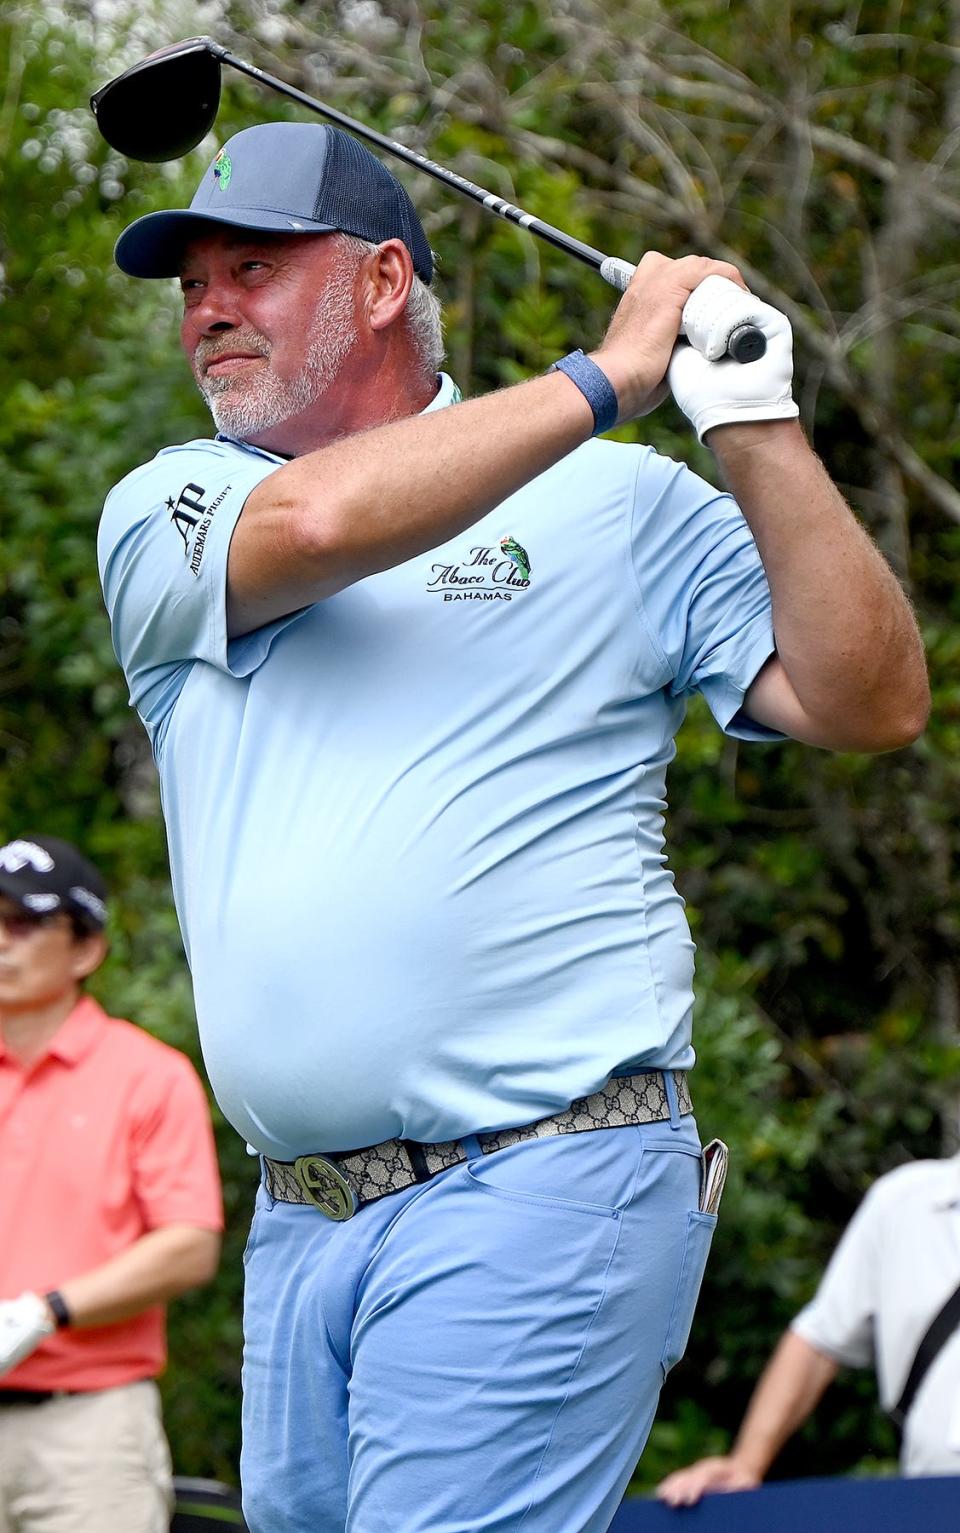 Darren Clarke tees off on the 16th tee during the 35th Anniversary of the Chubb Classic at the Tiburón Golf Club in Naples, Saturday, Feb. 19, 2022.(Photo/Chris Tilley)